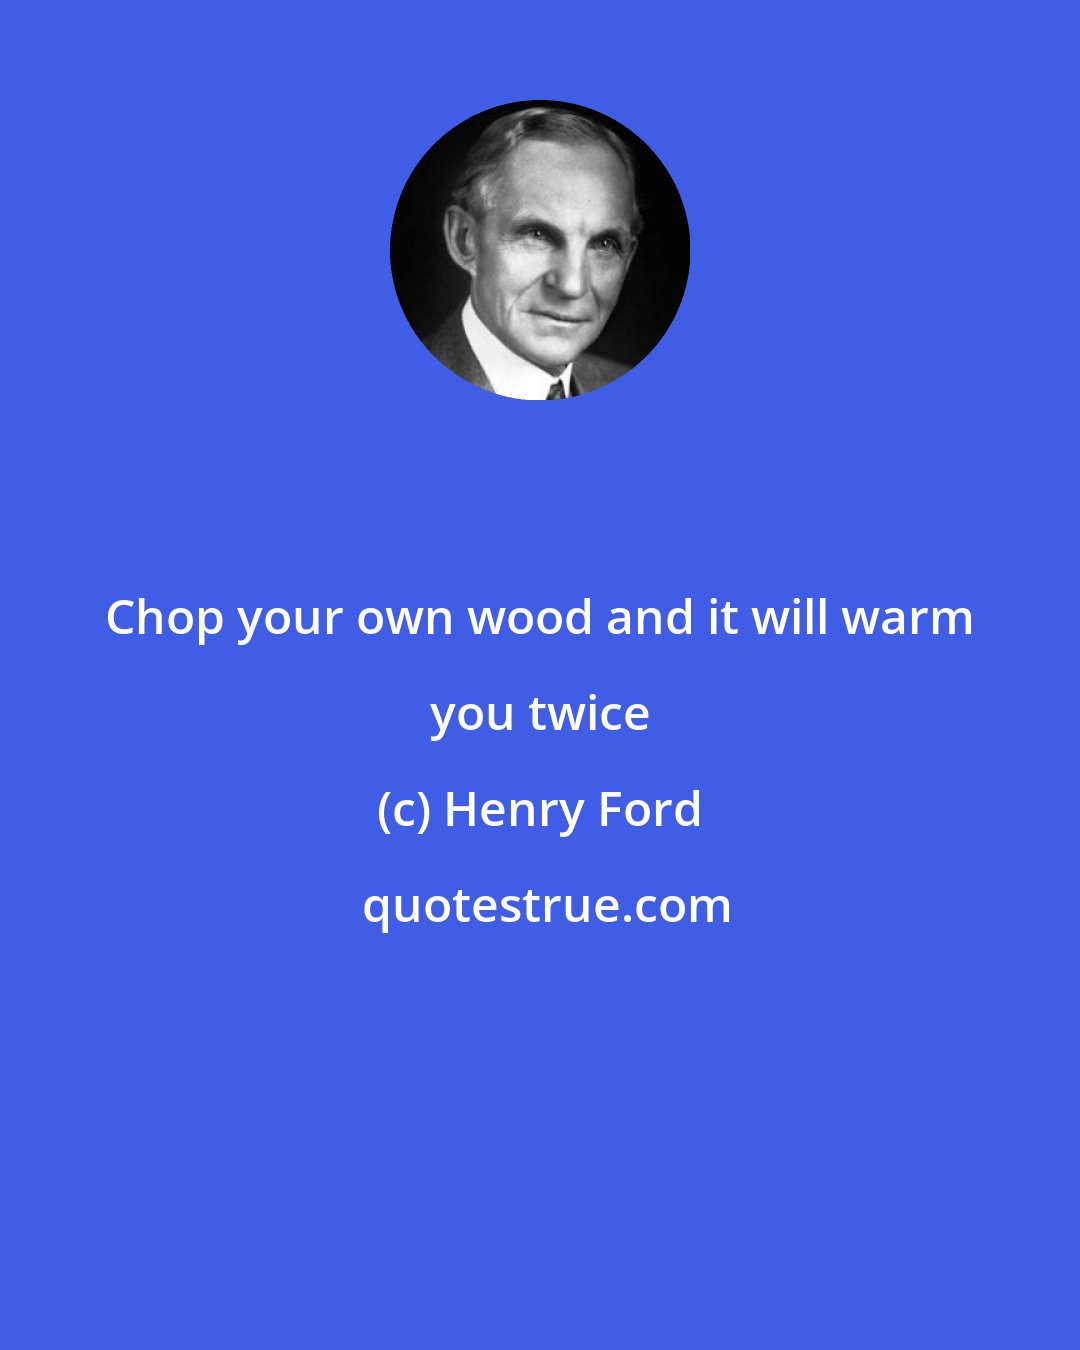 Henry Ford: Chop your own wood and it will warm you twice